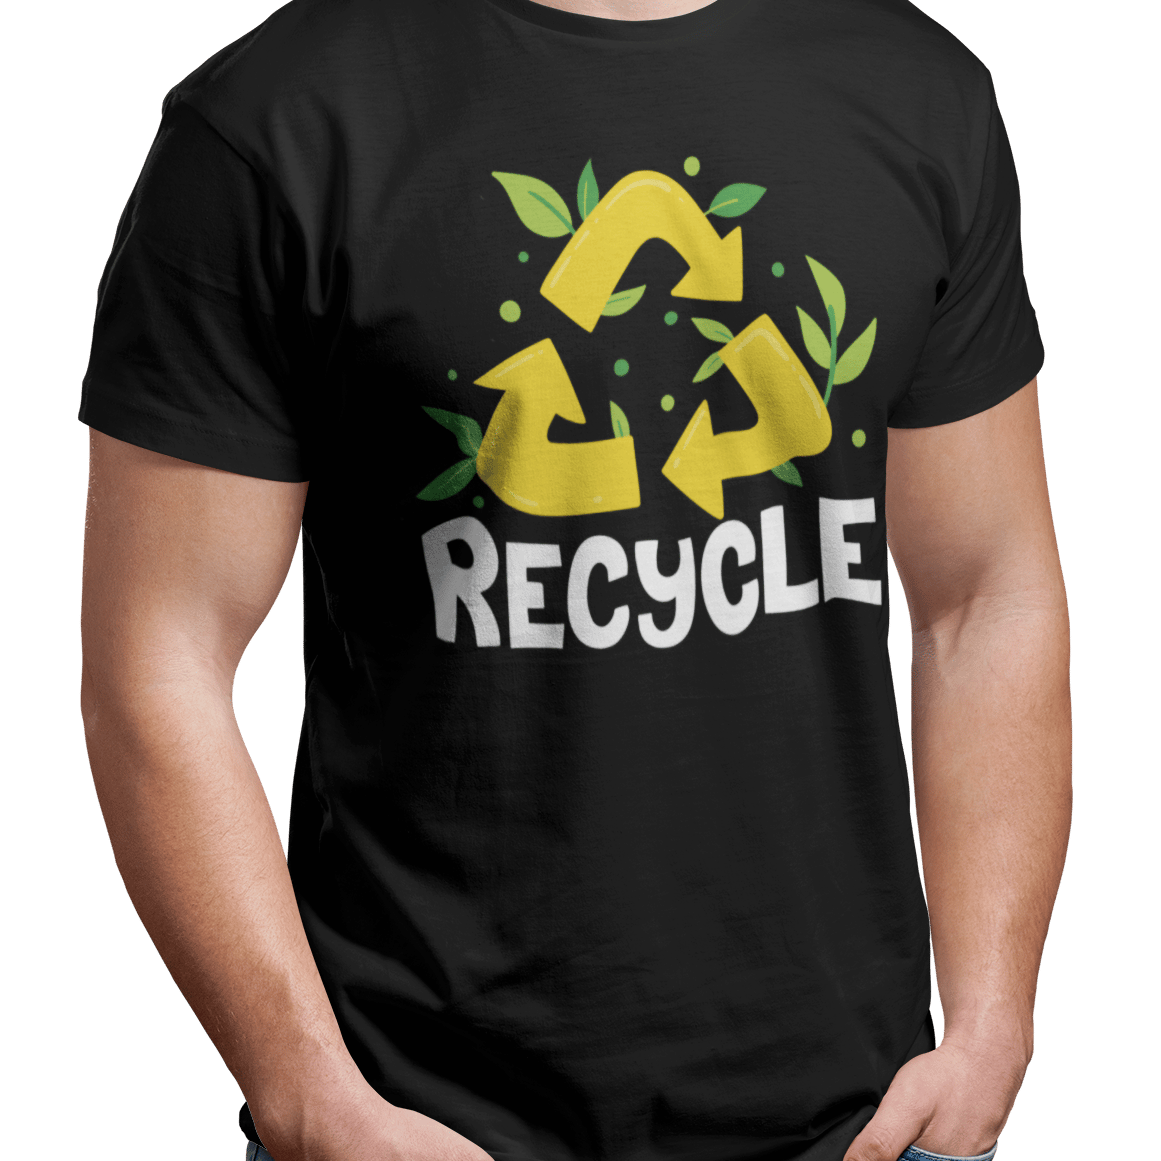 How can you recycle an old T-shirt?